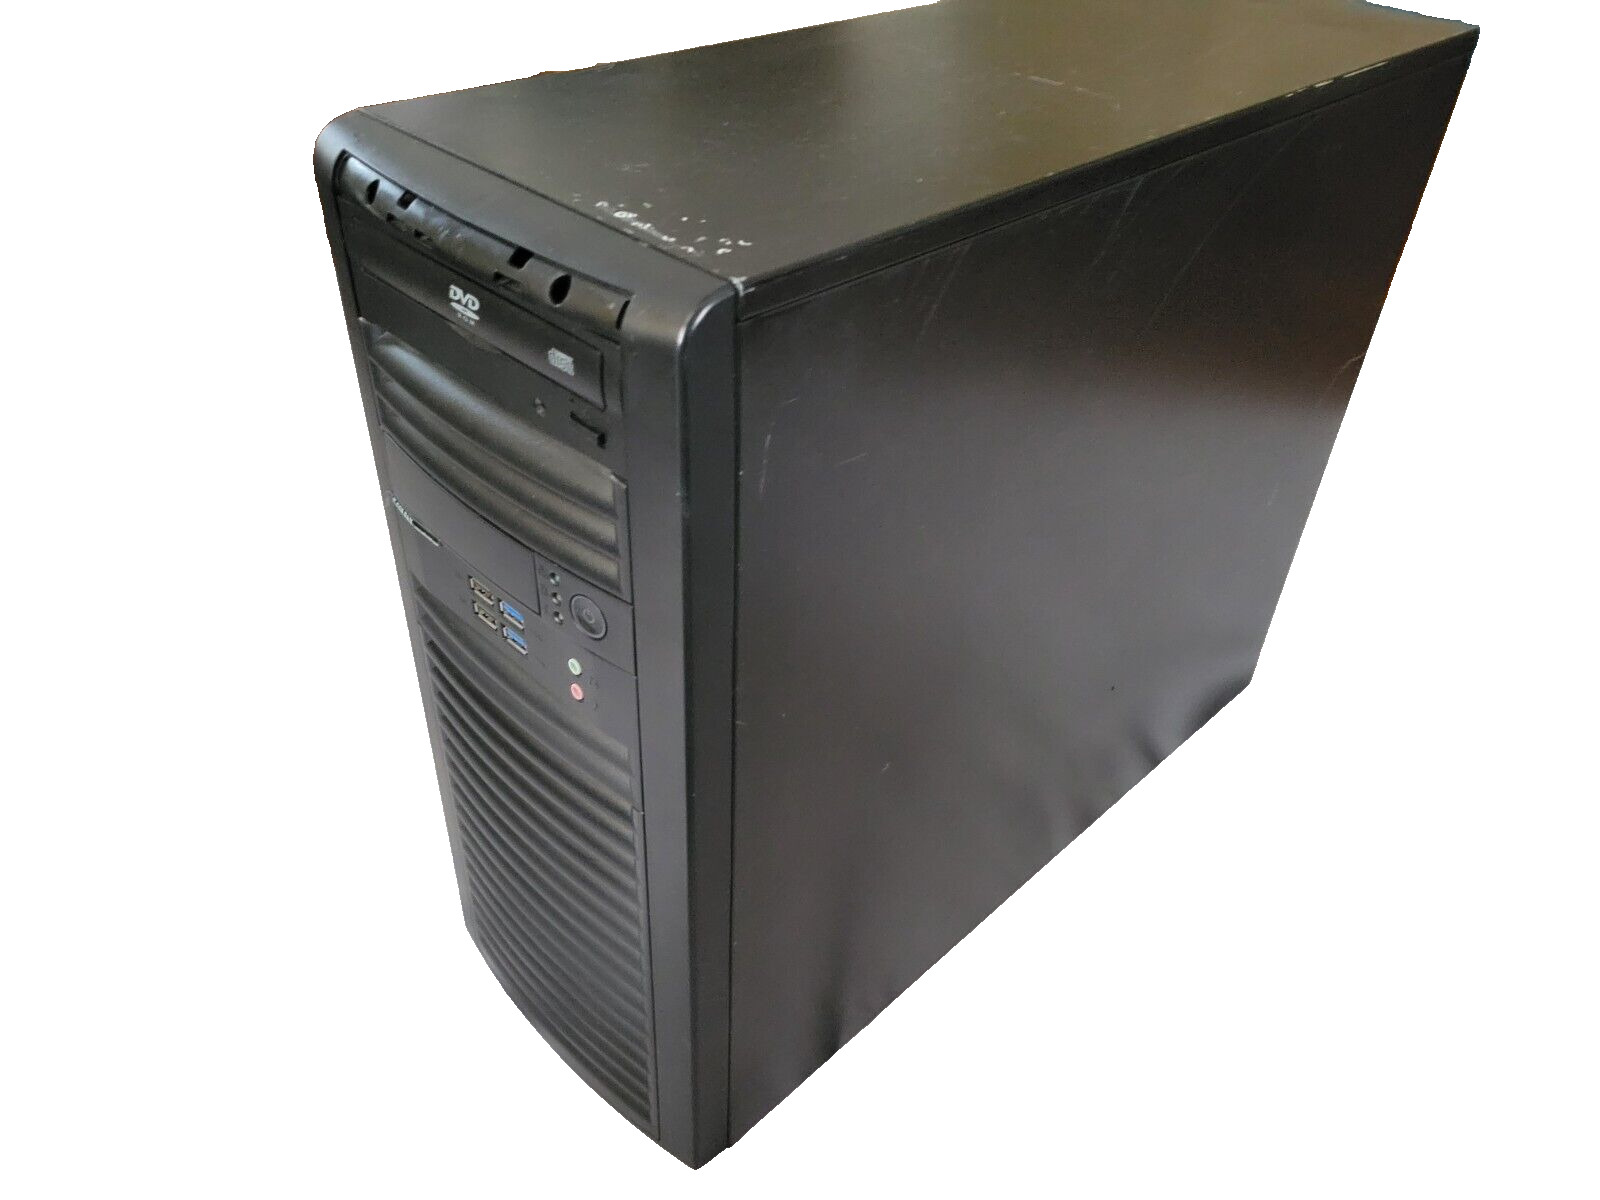 Supermicro Superchassis CSE-732 Mid Tower Server Chassis 1x 900w gold psu